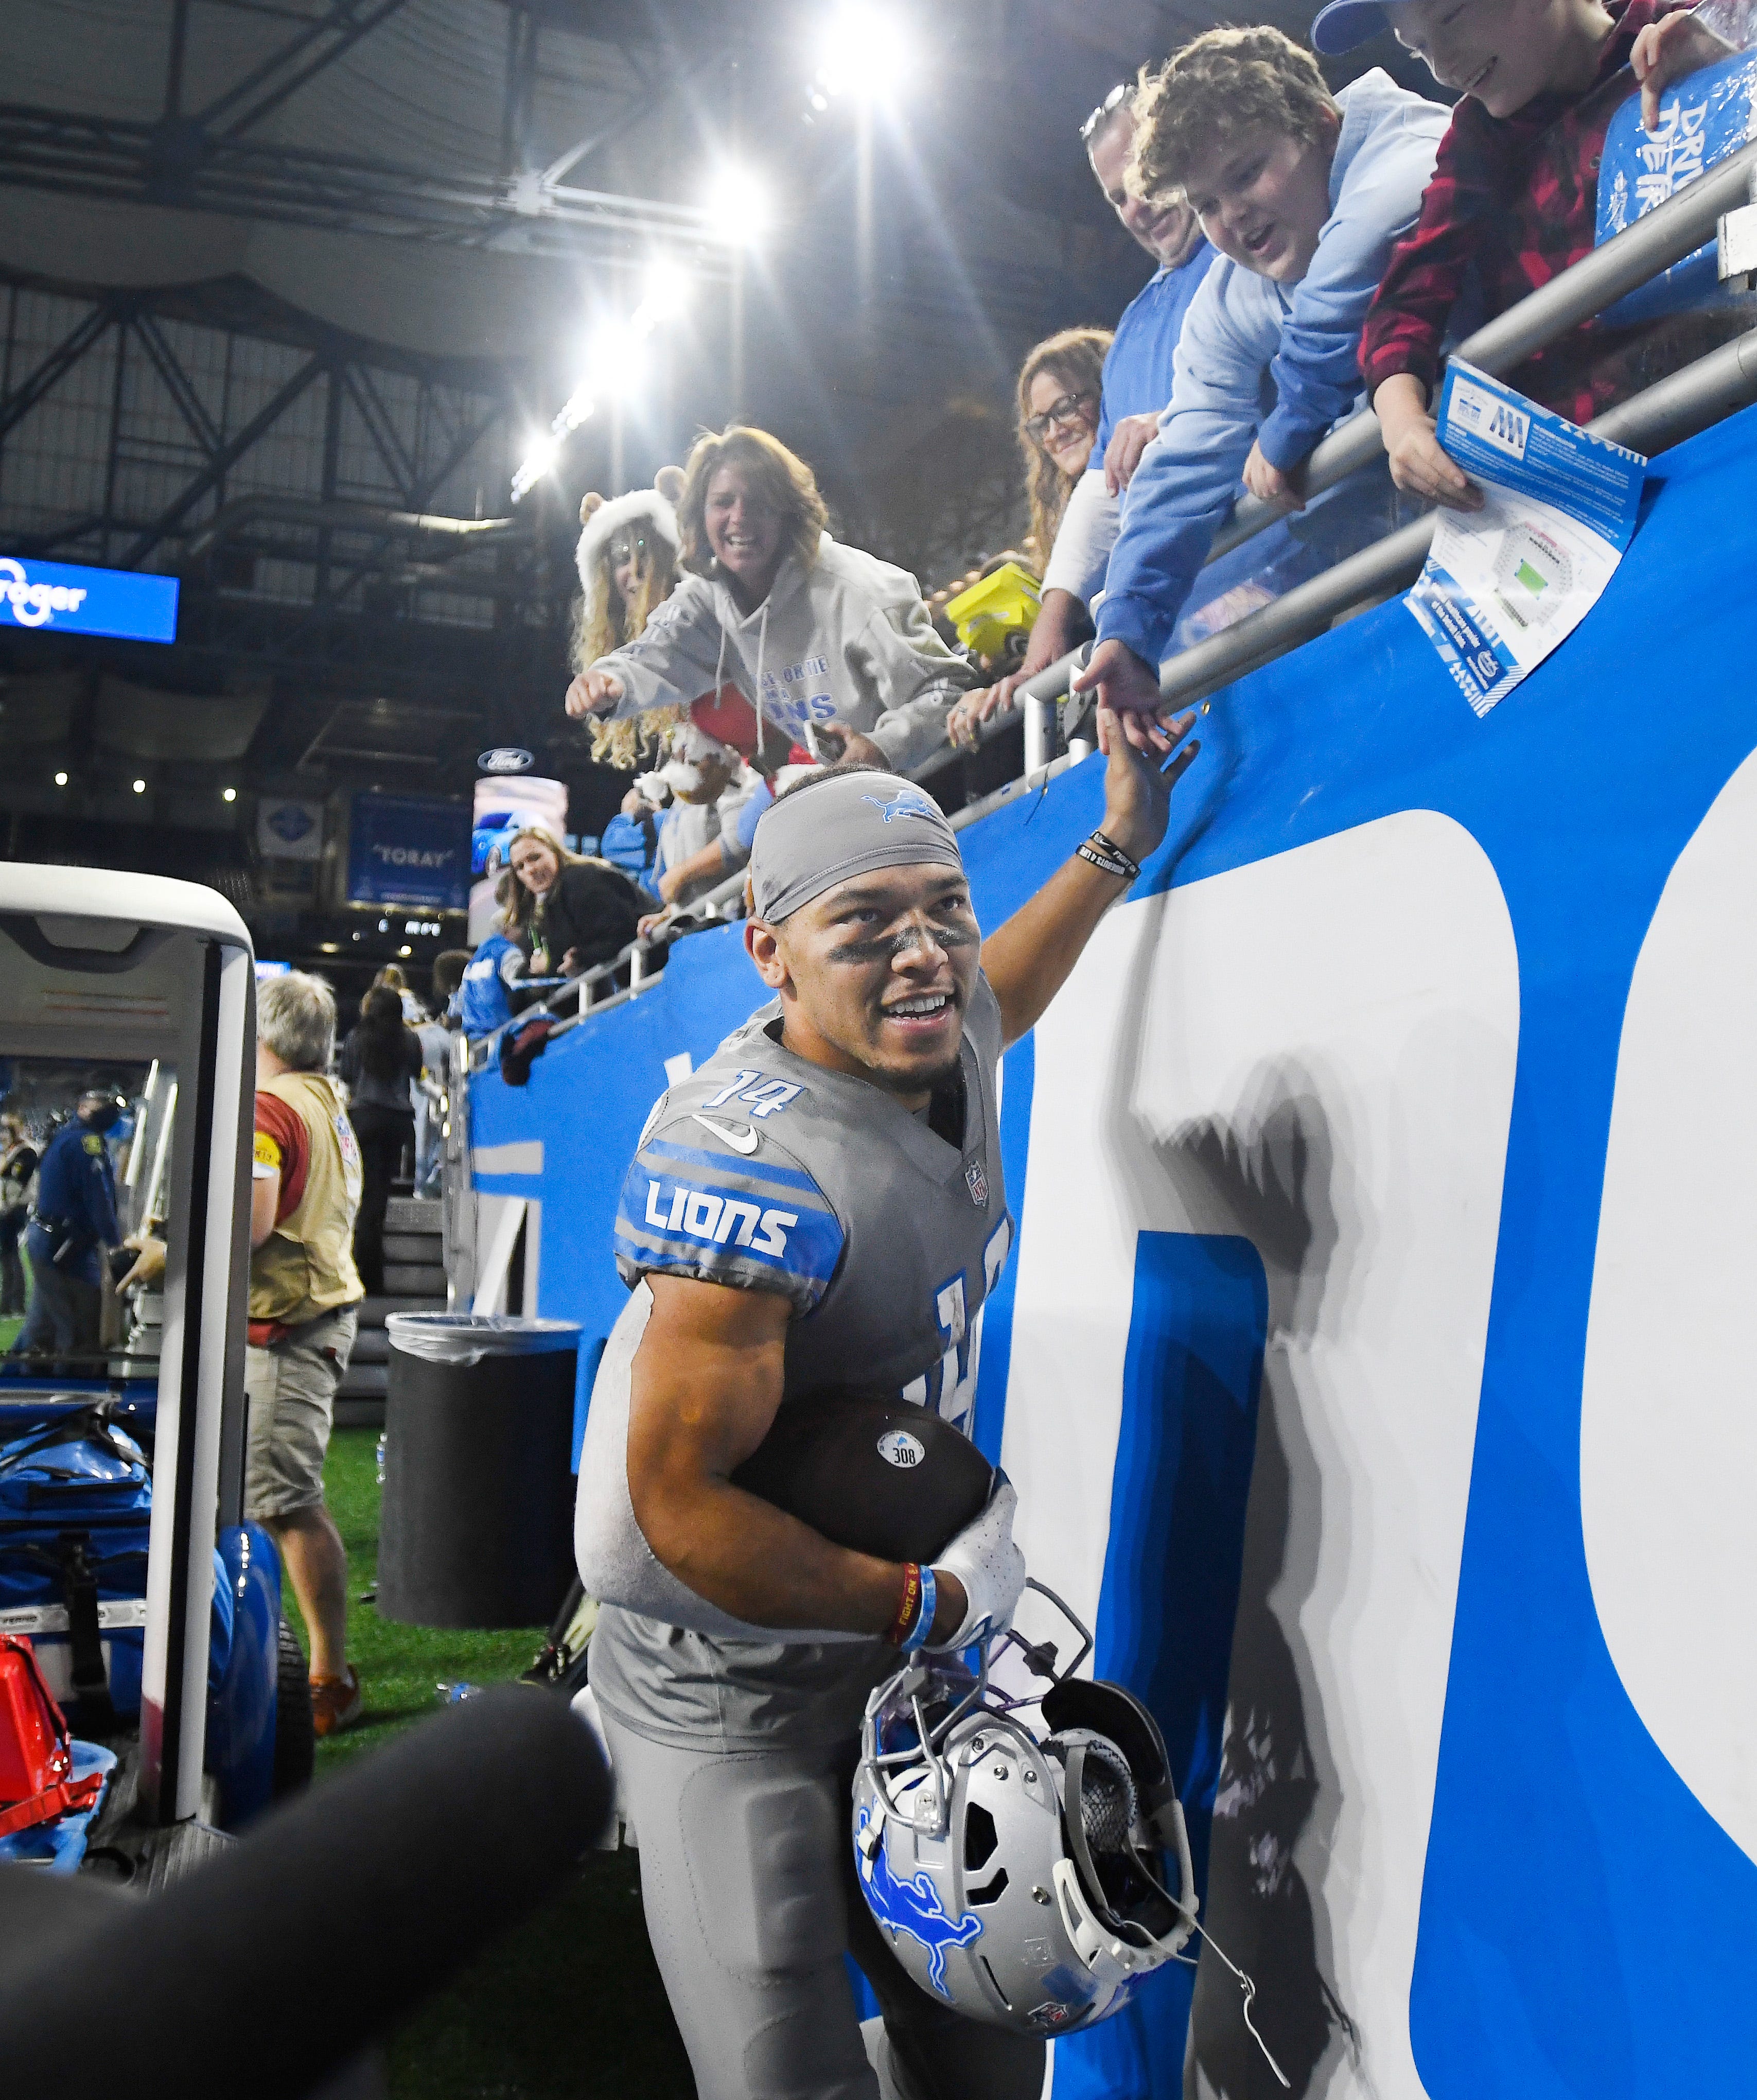 Lions receiver Amon-Ra St. Brown slaps hands with fans as he leaves the field after catching the game winning touchdown, with no time left on the clock, to defeat the Vikings, 29-27.